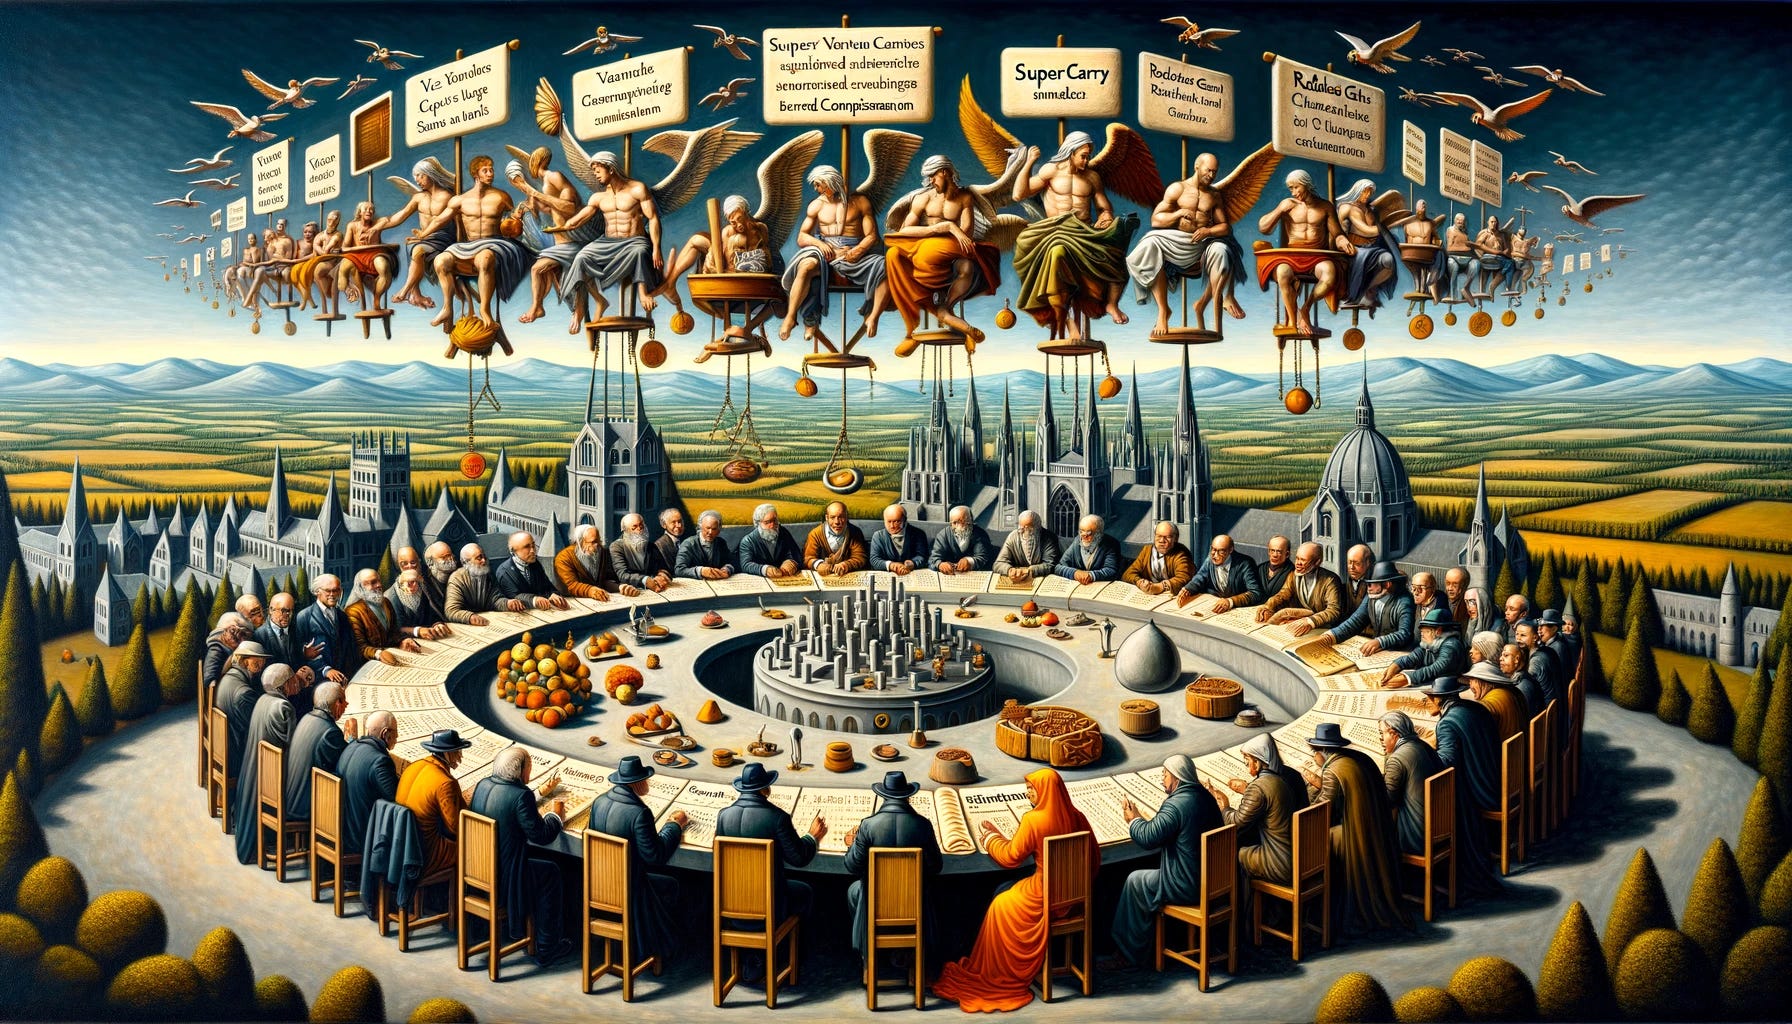 Oil painting inspired by Hieronymus Bosch's intricate and surreal style. A vast landscape depicts Europe with prominent LPs (Limited Partners) gathered around a large roundtable. They're deep in discussion, with scrolls, charts, and tokens symbolizing various investment terms. Off to one side, VCs attempt to float 'super carries' in the air, but they're weighted down by chains representing compensation. In another area, a scale balances 'super carry' on one side and 'reduced gains' on the other, highlighting the theme of proportionate compensation. Venture stakeholders, represented by grand figures like the EIF, hand down standardized terms from the heavens. New funds appear as budding trees, with simple and straight branches. Meanwhile, GPs who seek super carry present evidence of their past successes to a panel of LPs, with some GPs being turned away due to lack of evidence. In the foreground, fund managers navigate a maze, trying to engage with cornerstone LPs, forging consensus on terms and upholding transparency. Throughout the scene, various creatures and characters from Bosch's paintings can be seen, adding a layer of surrealism and complexity.